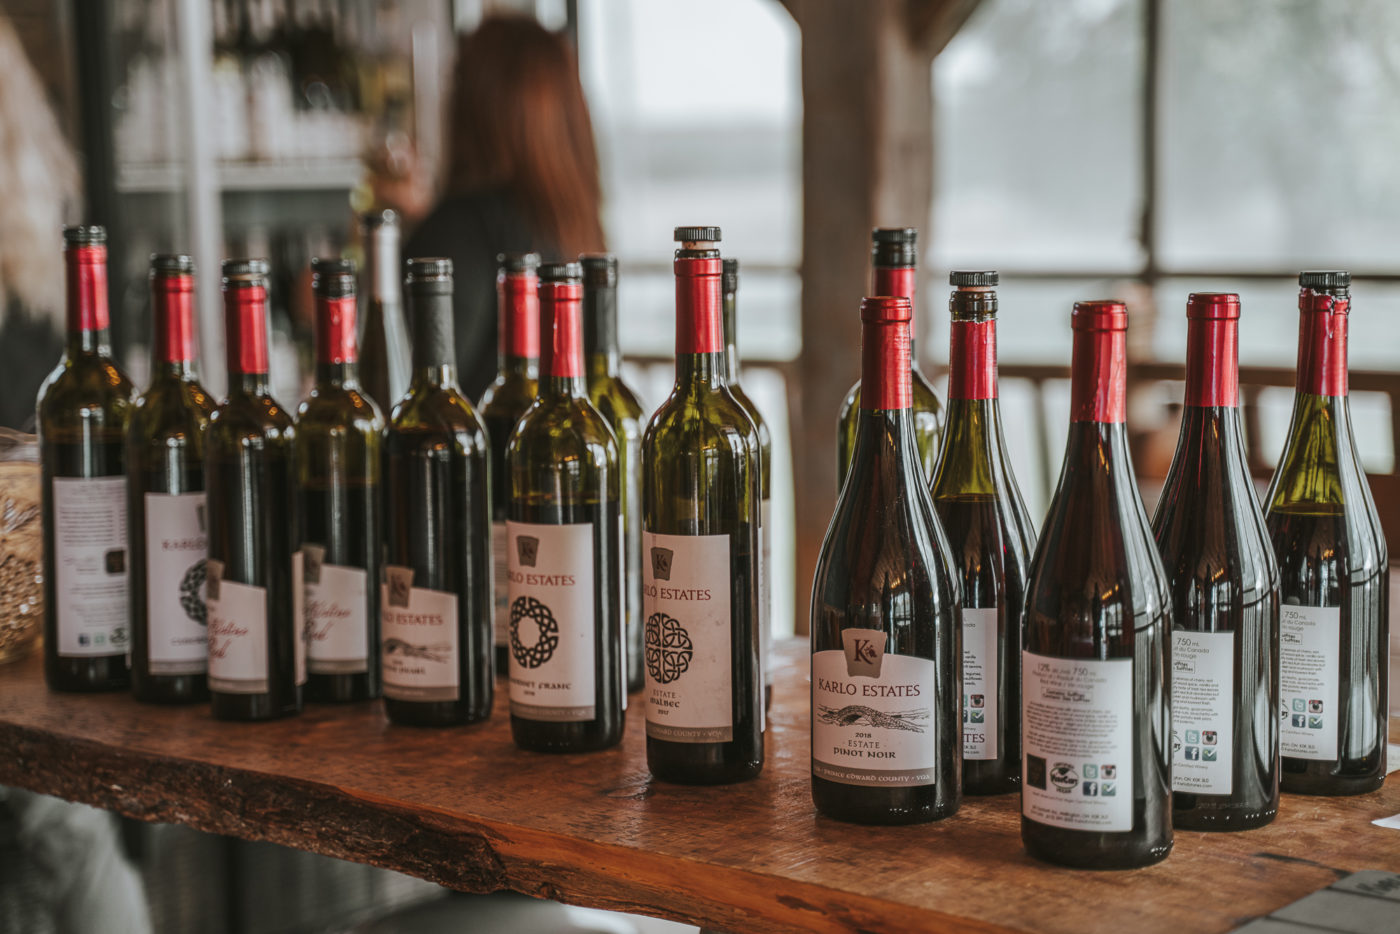 Prince Edward County wineries